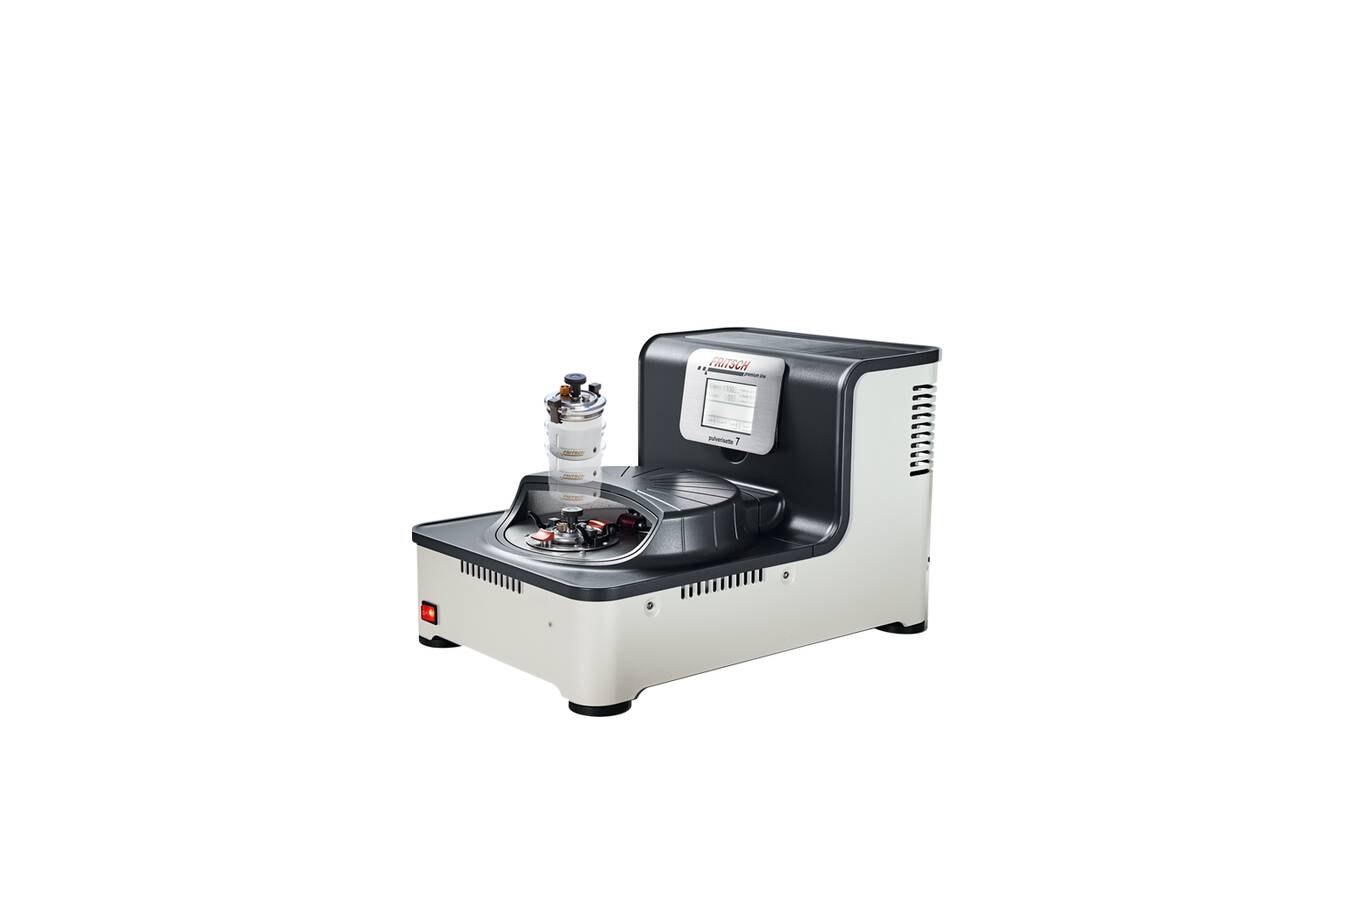 Planetary Micro Mill PULVERISETTE 7 premium line: nano grinding for small quantities in 2 grinding bowls of 20 ml to 80 ml volume